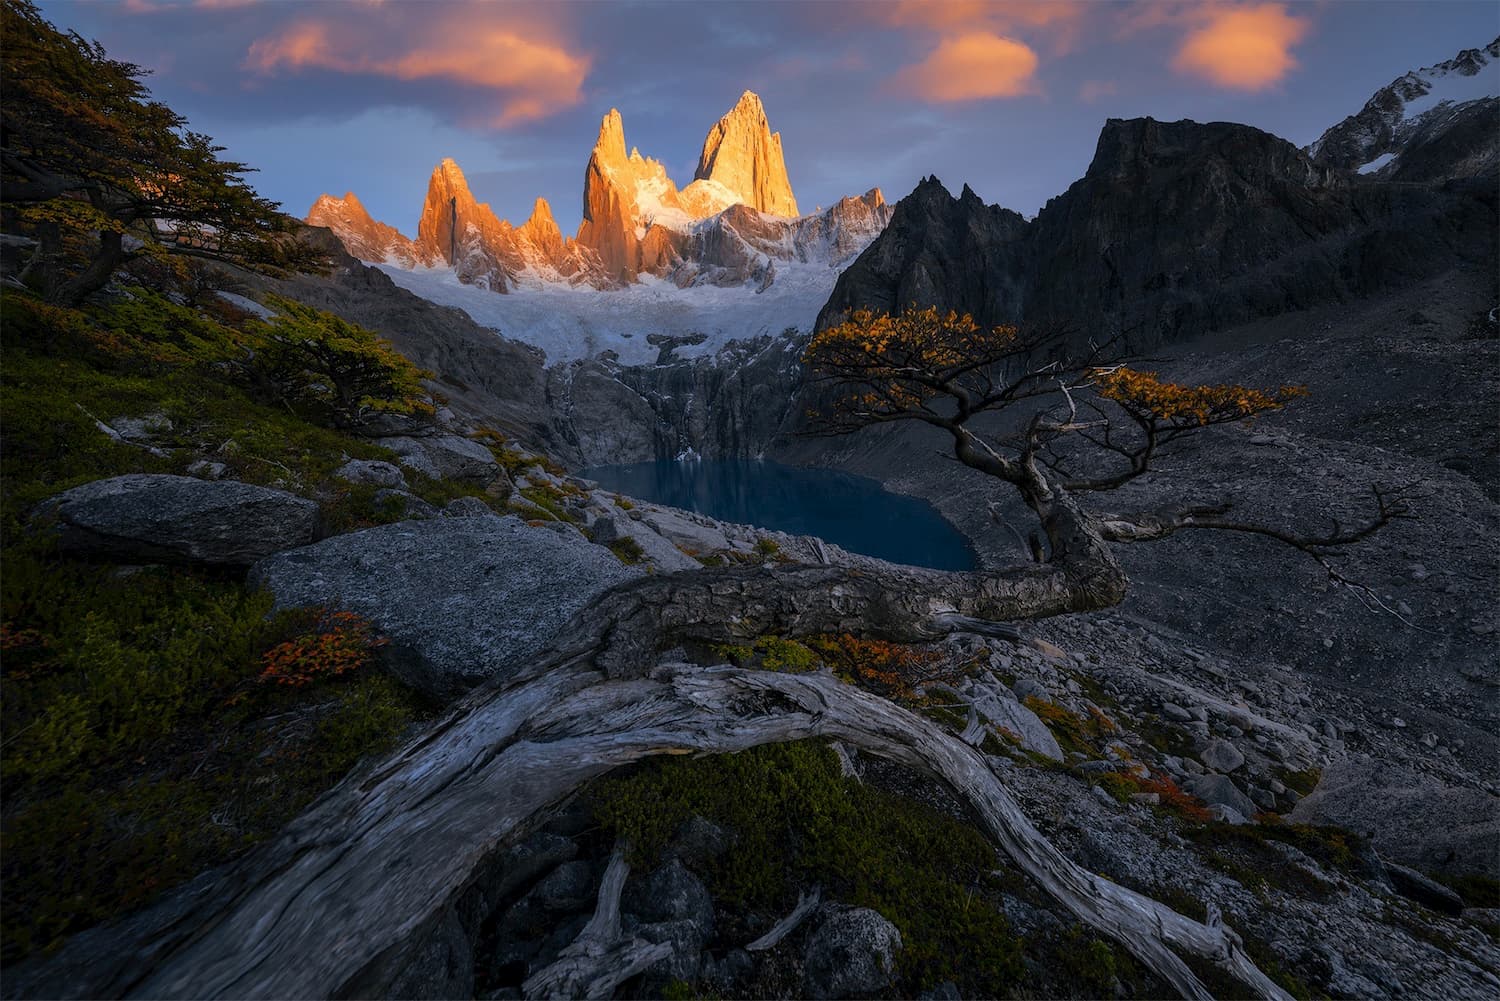 @lucabeniniphotography and torres del paine